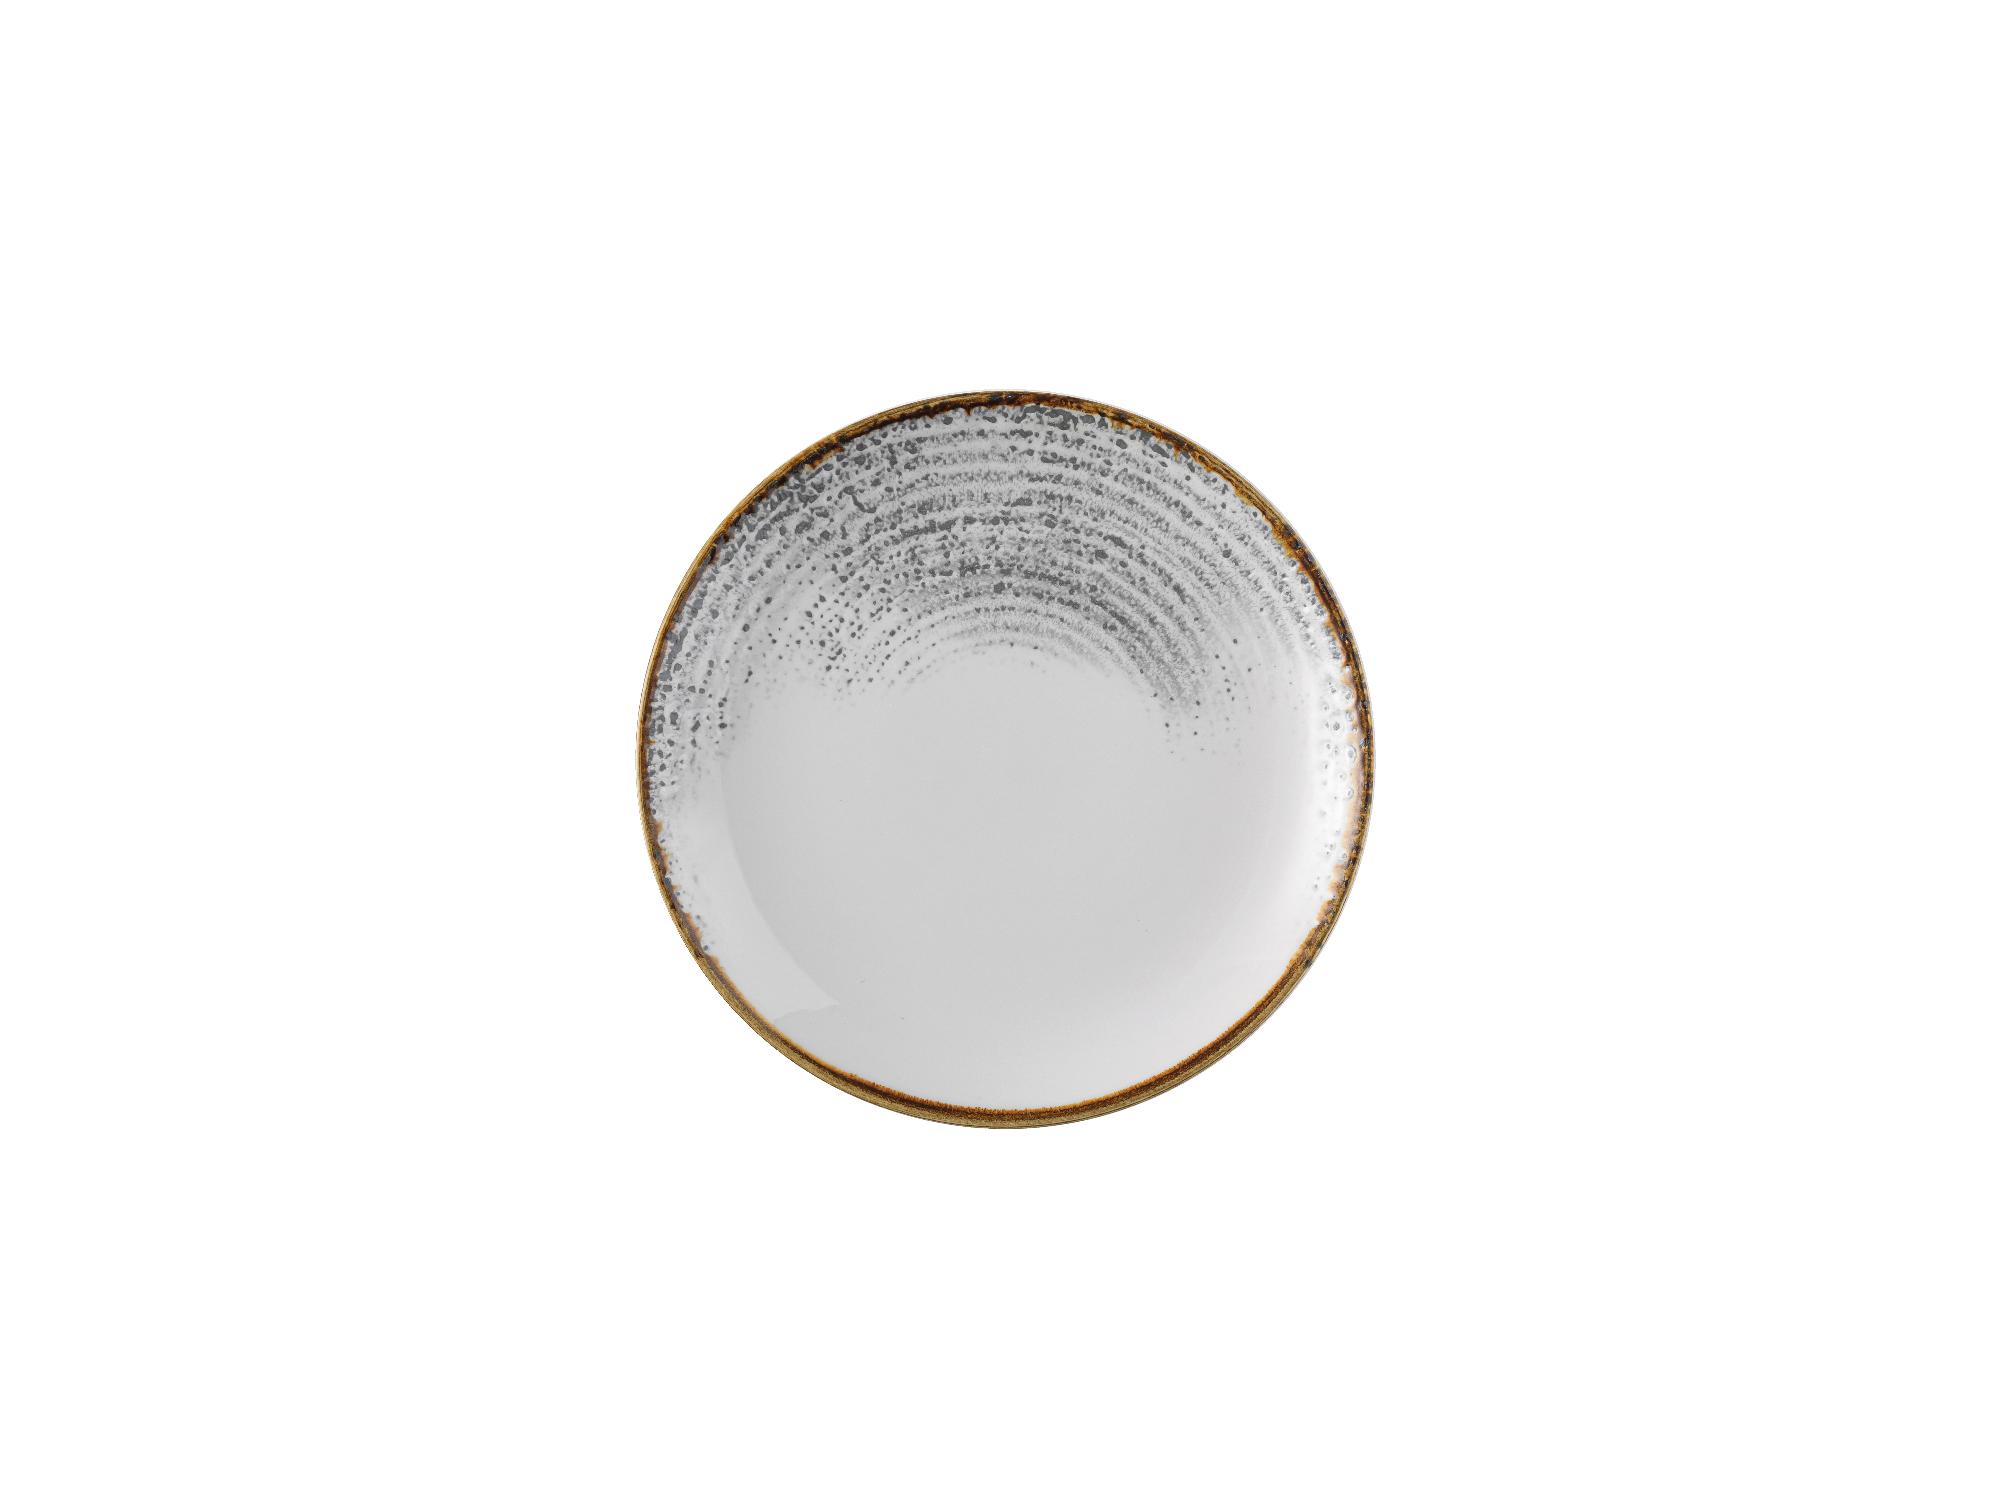 Homespun Accents Jasper Grey coupe plate, 217mm